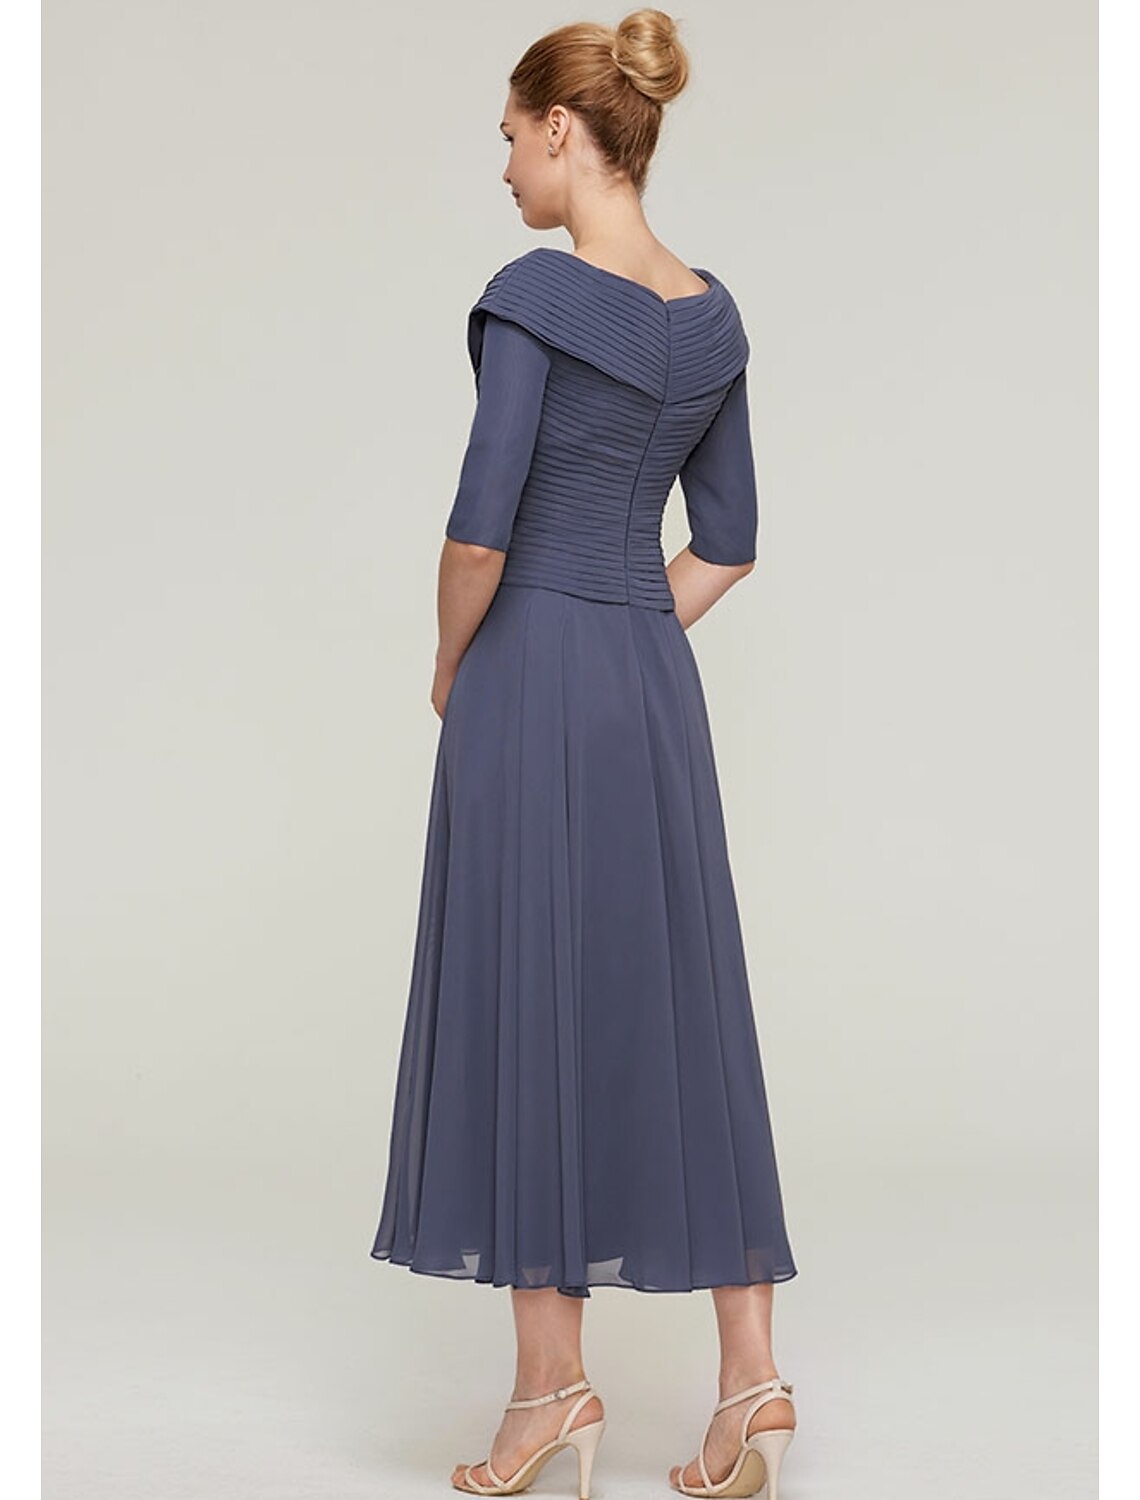 A-Line Mother of the Bride Dress Plus Size V Neck Ankle Length Chiffon Half Sleeve with Pleats